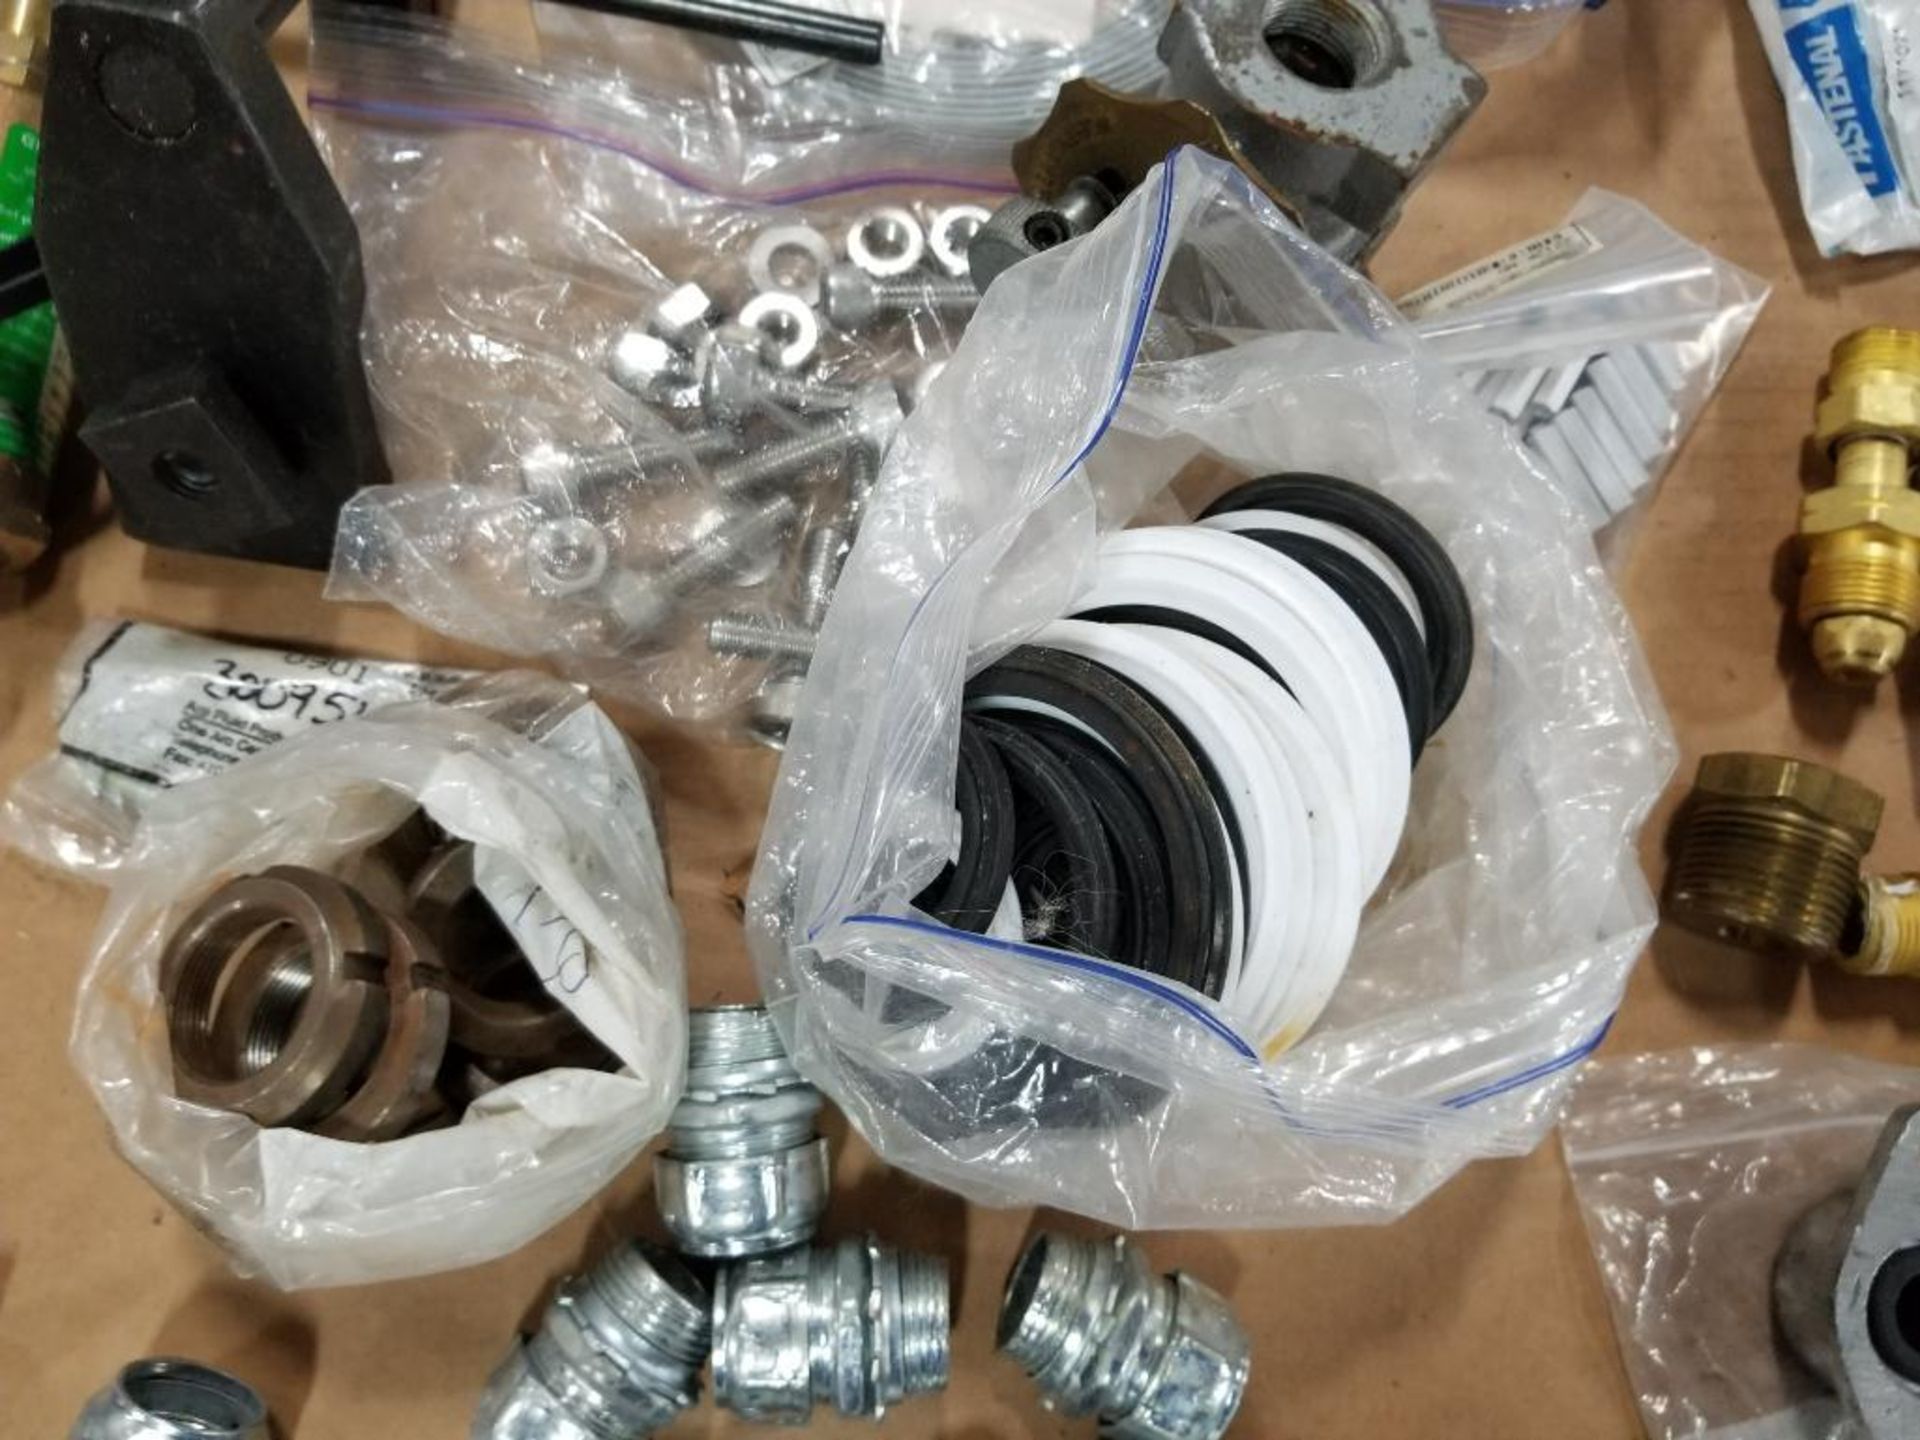 Pallet of flow control fittings, hardware. - Image 17 of 44